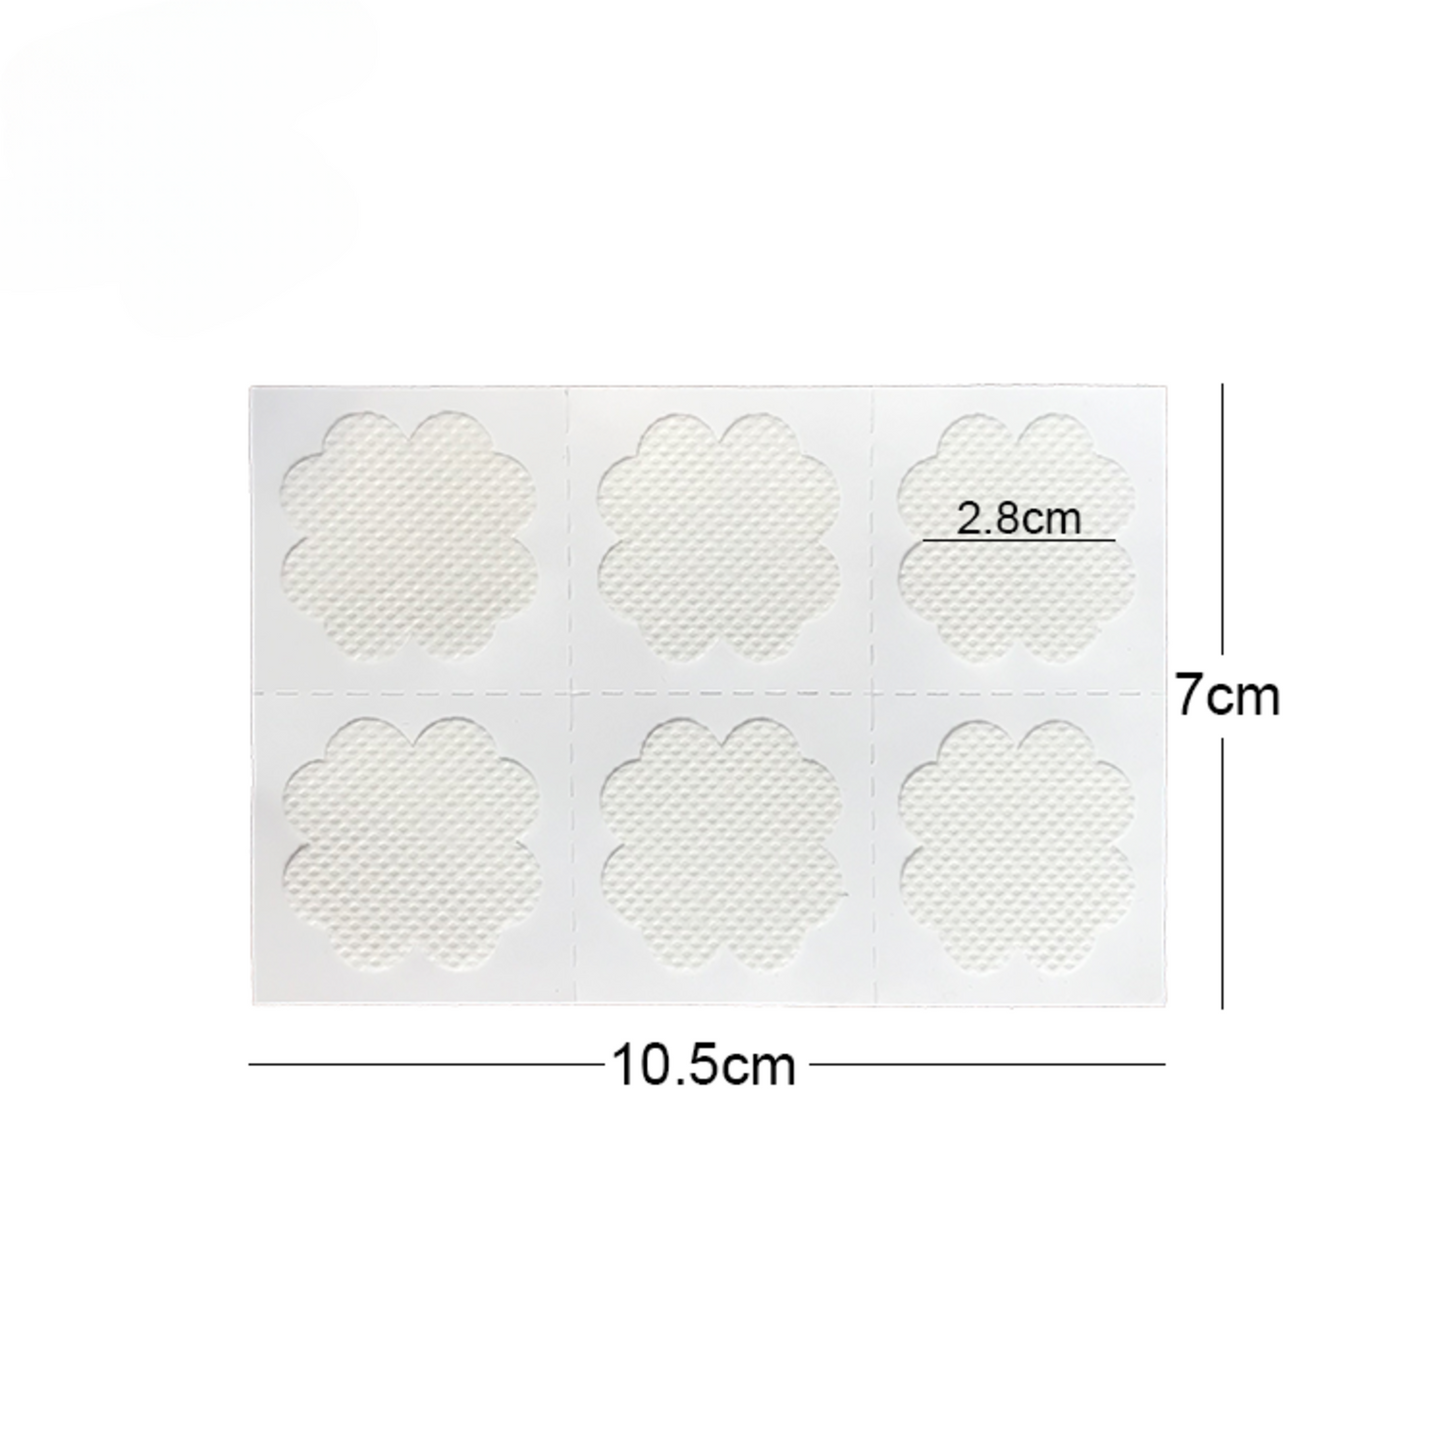 XUAN WU YAN - CAPSIUM PLASTER - MOSQUITO REPELLENT PATCH (12 PIECE)